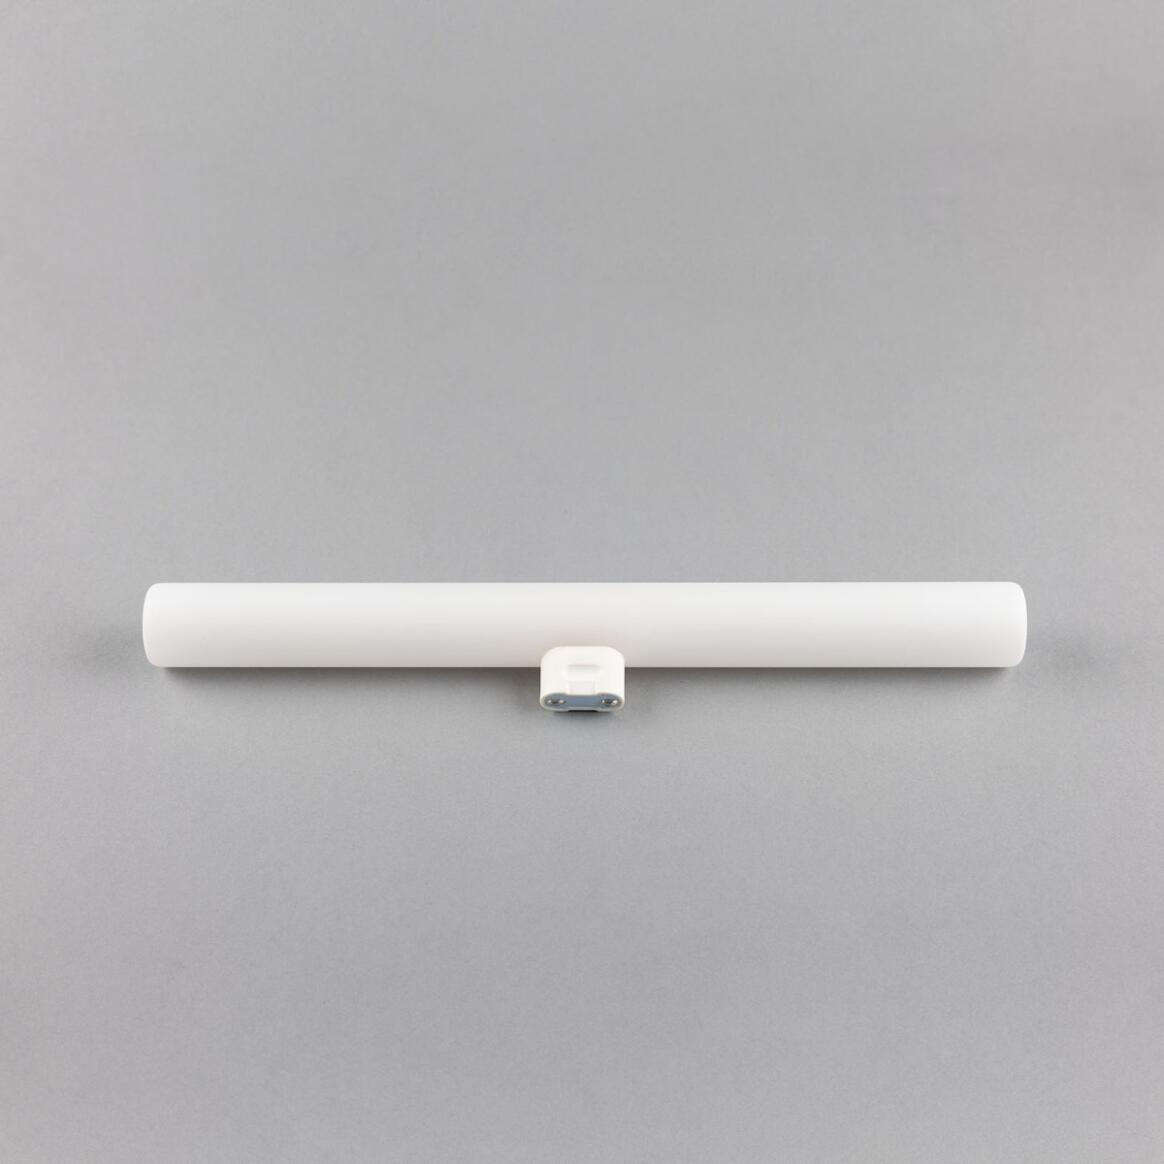 S14d Tube Bulb Porcelain White Dimmable 5W 2700k 400lm 30cm main product image